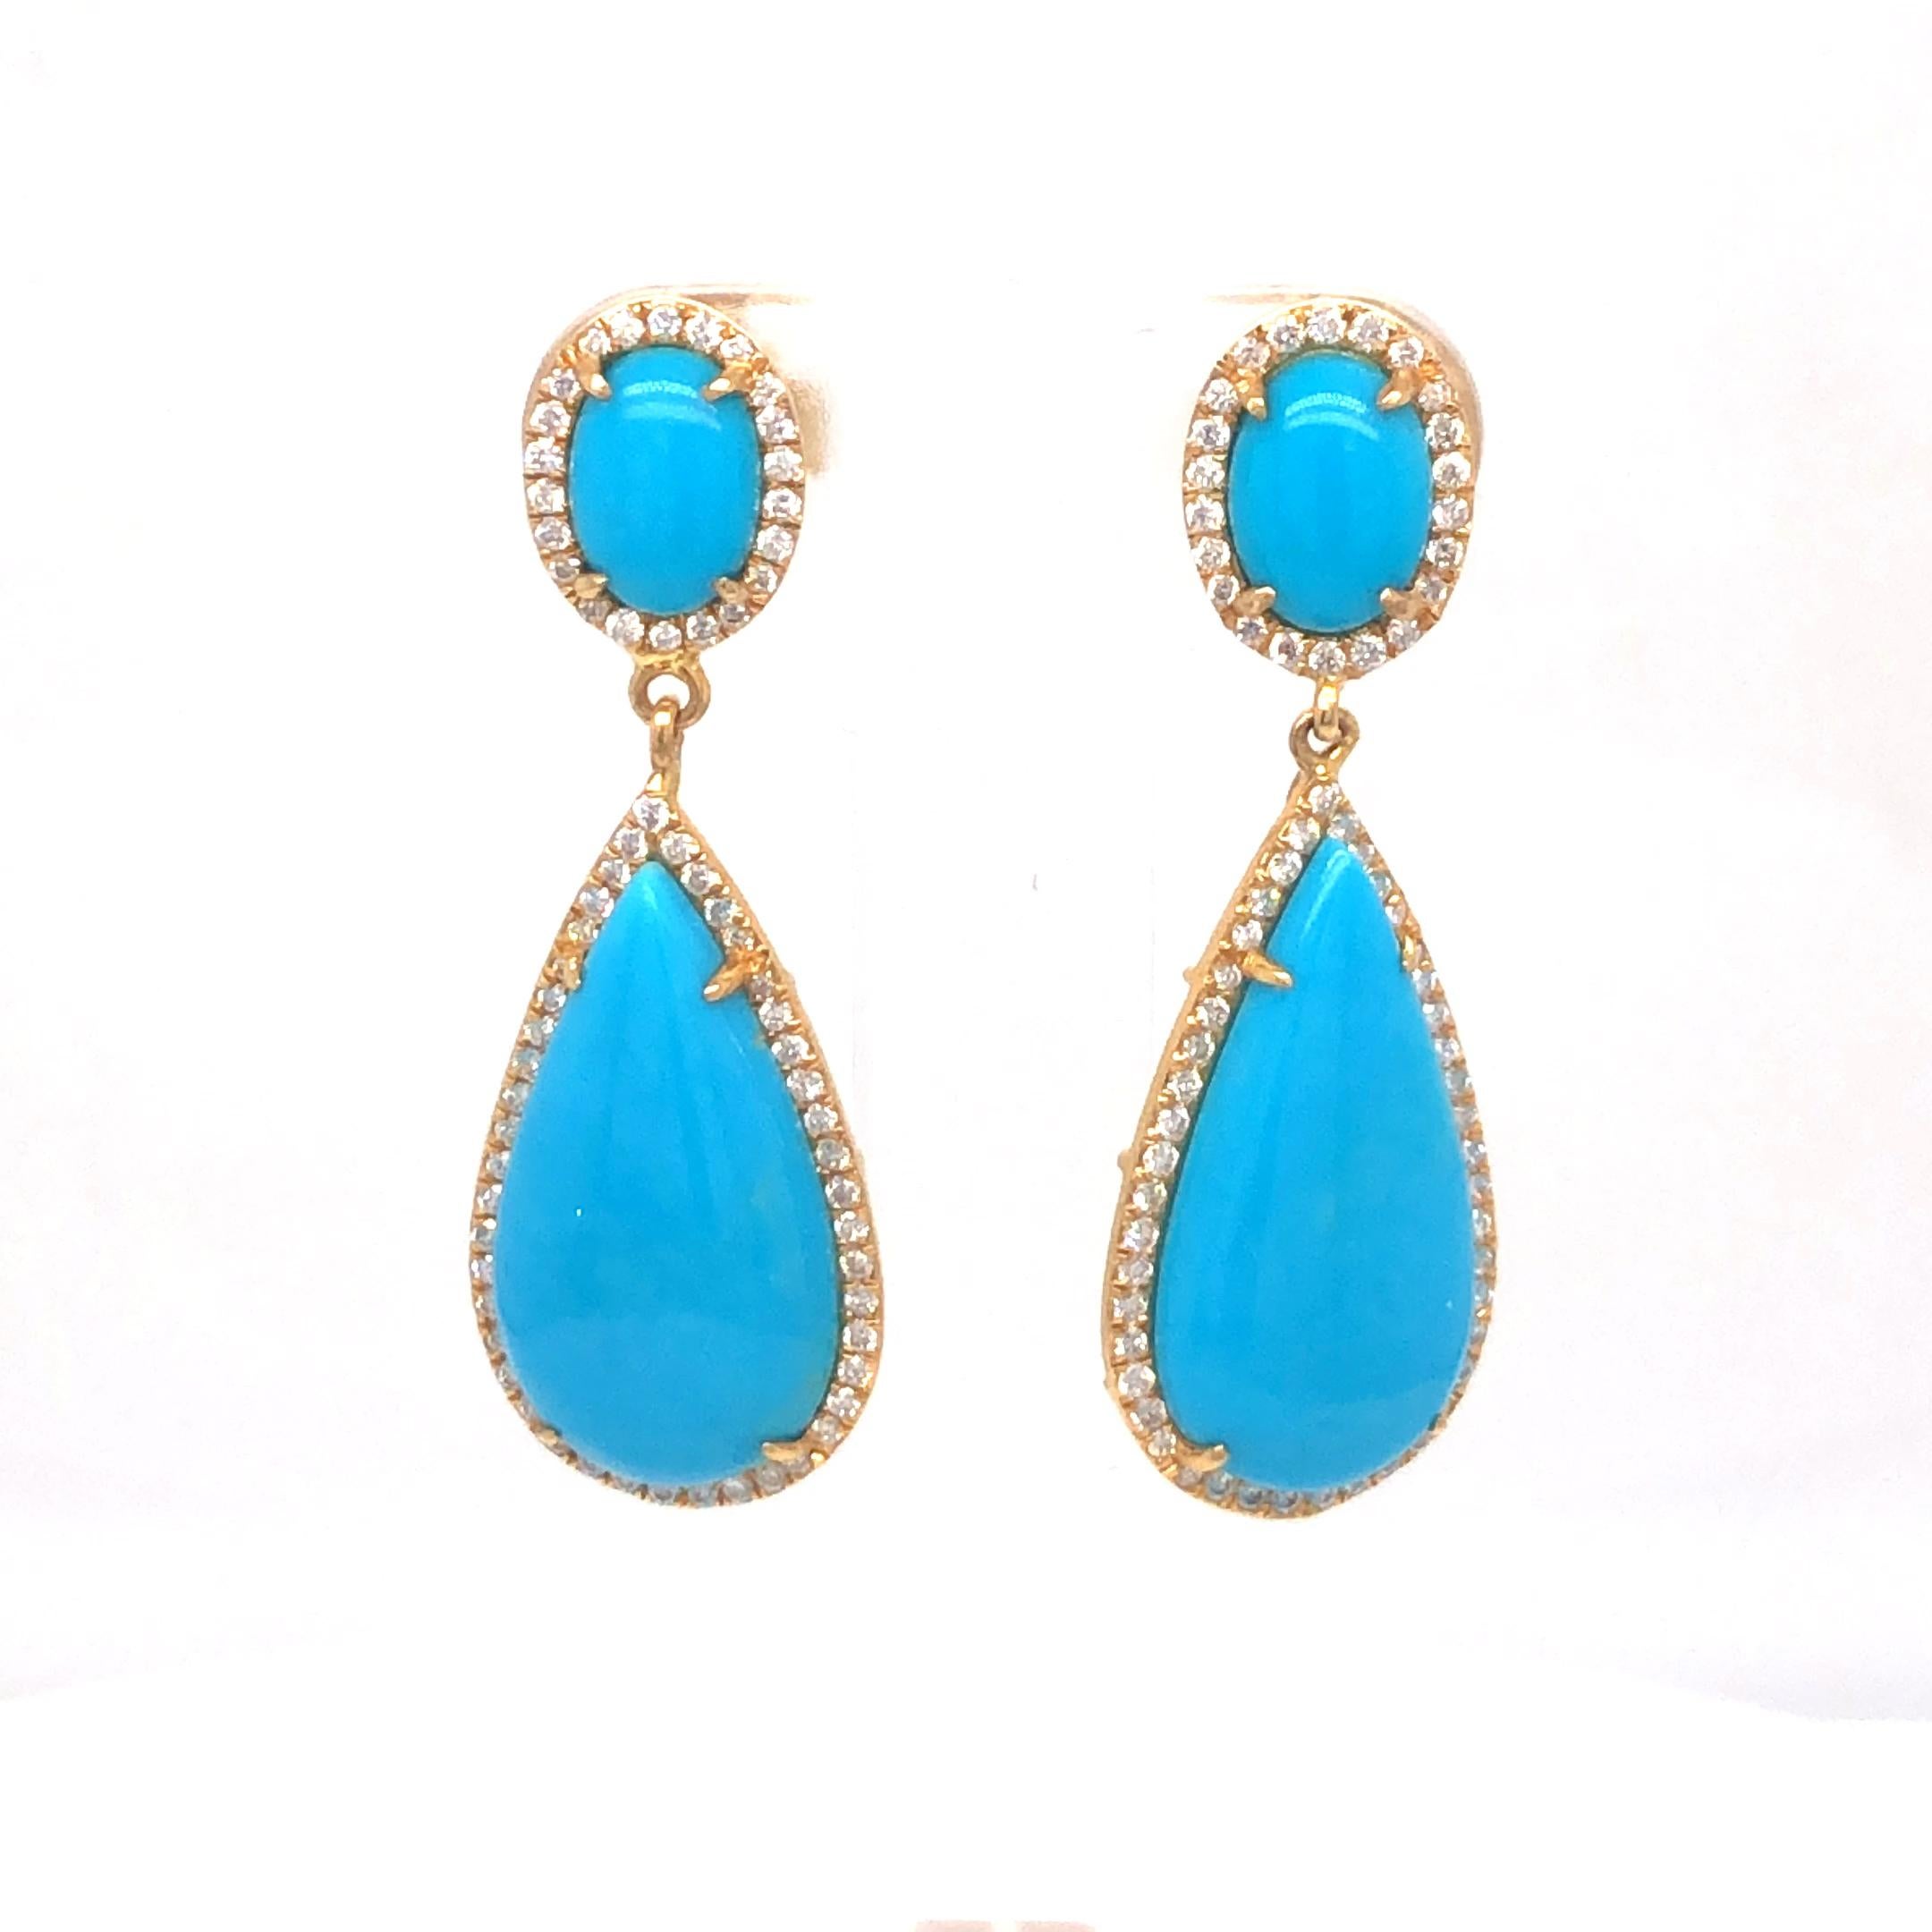 7.88ctw Turquoise And 0.48ctw Diamond Earrings 18K Yellow Gold 5.05 Grams